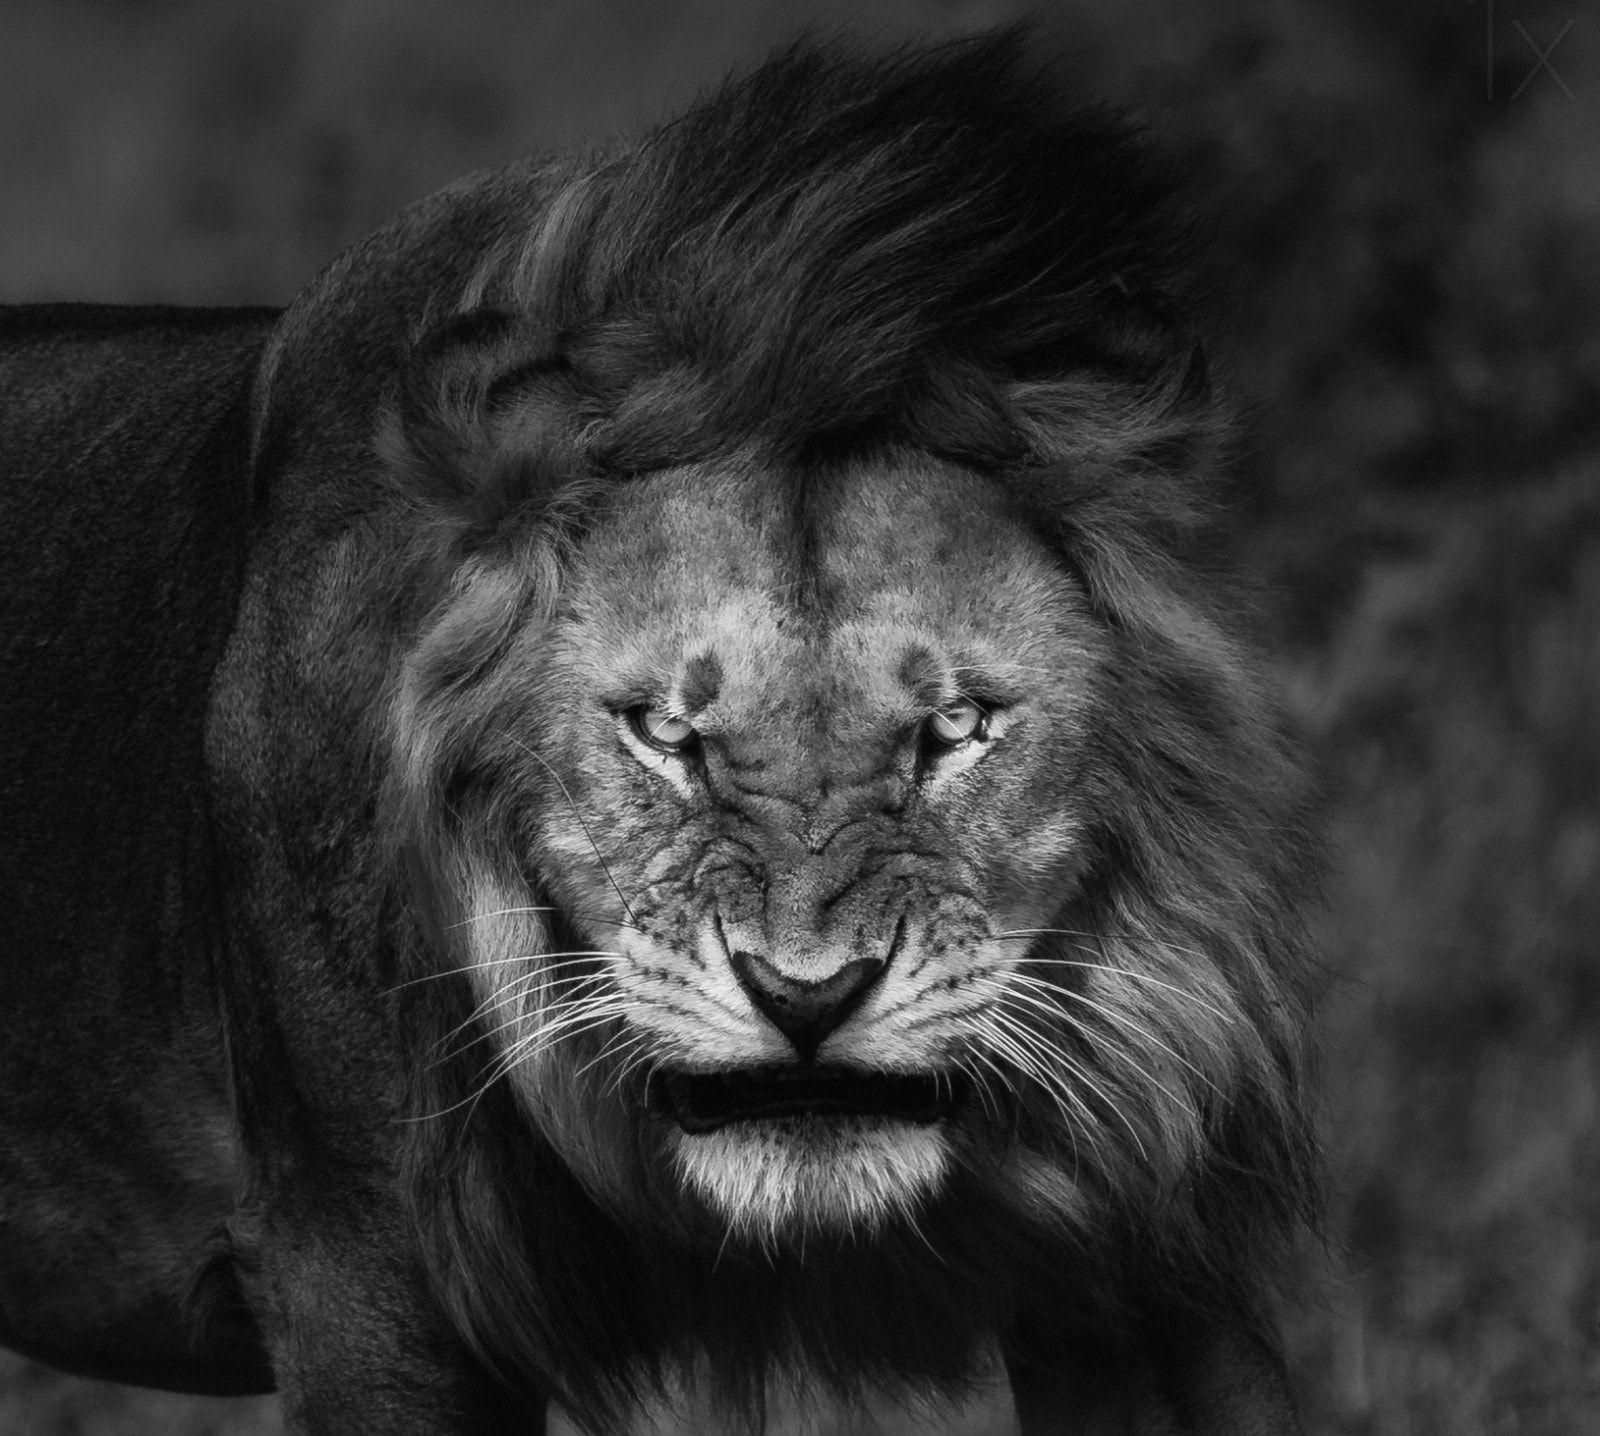 Angry Lion Expression Greyscale Wallpaper and Free Stock